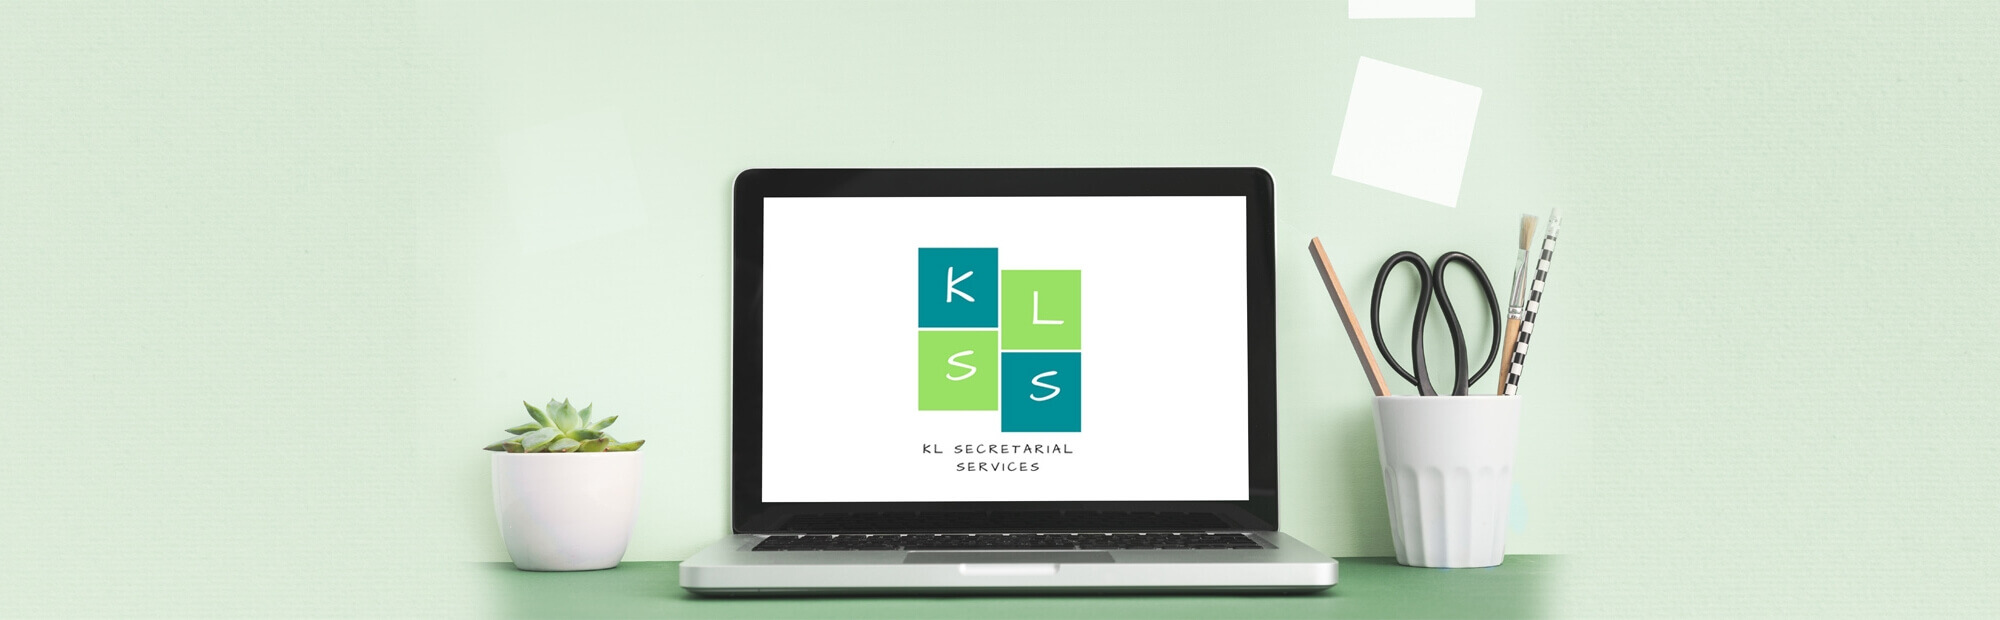 The logo of virtual assistant, Kerry Lummus, displayed on a laptop screen.